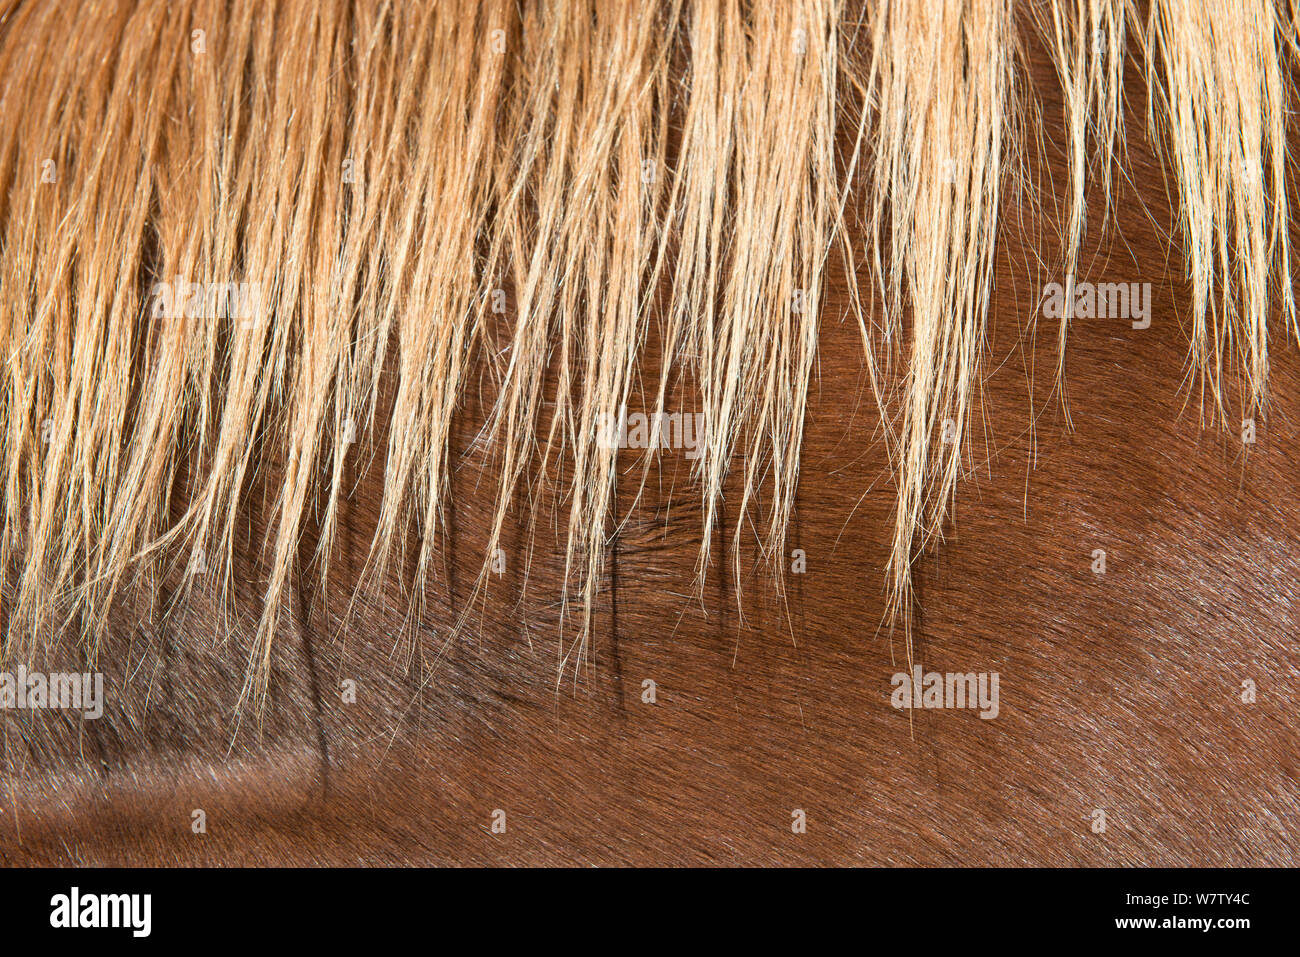 Horse hair on the mane of a Quarter horse, Shell, Bighorn Basin, Wyoming, USA, October. Stock Photo